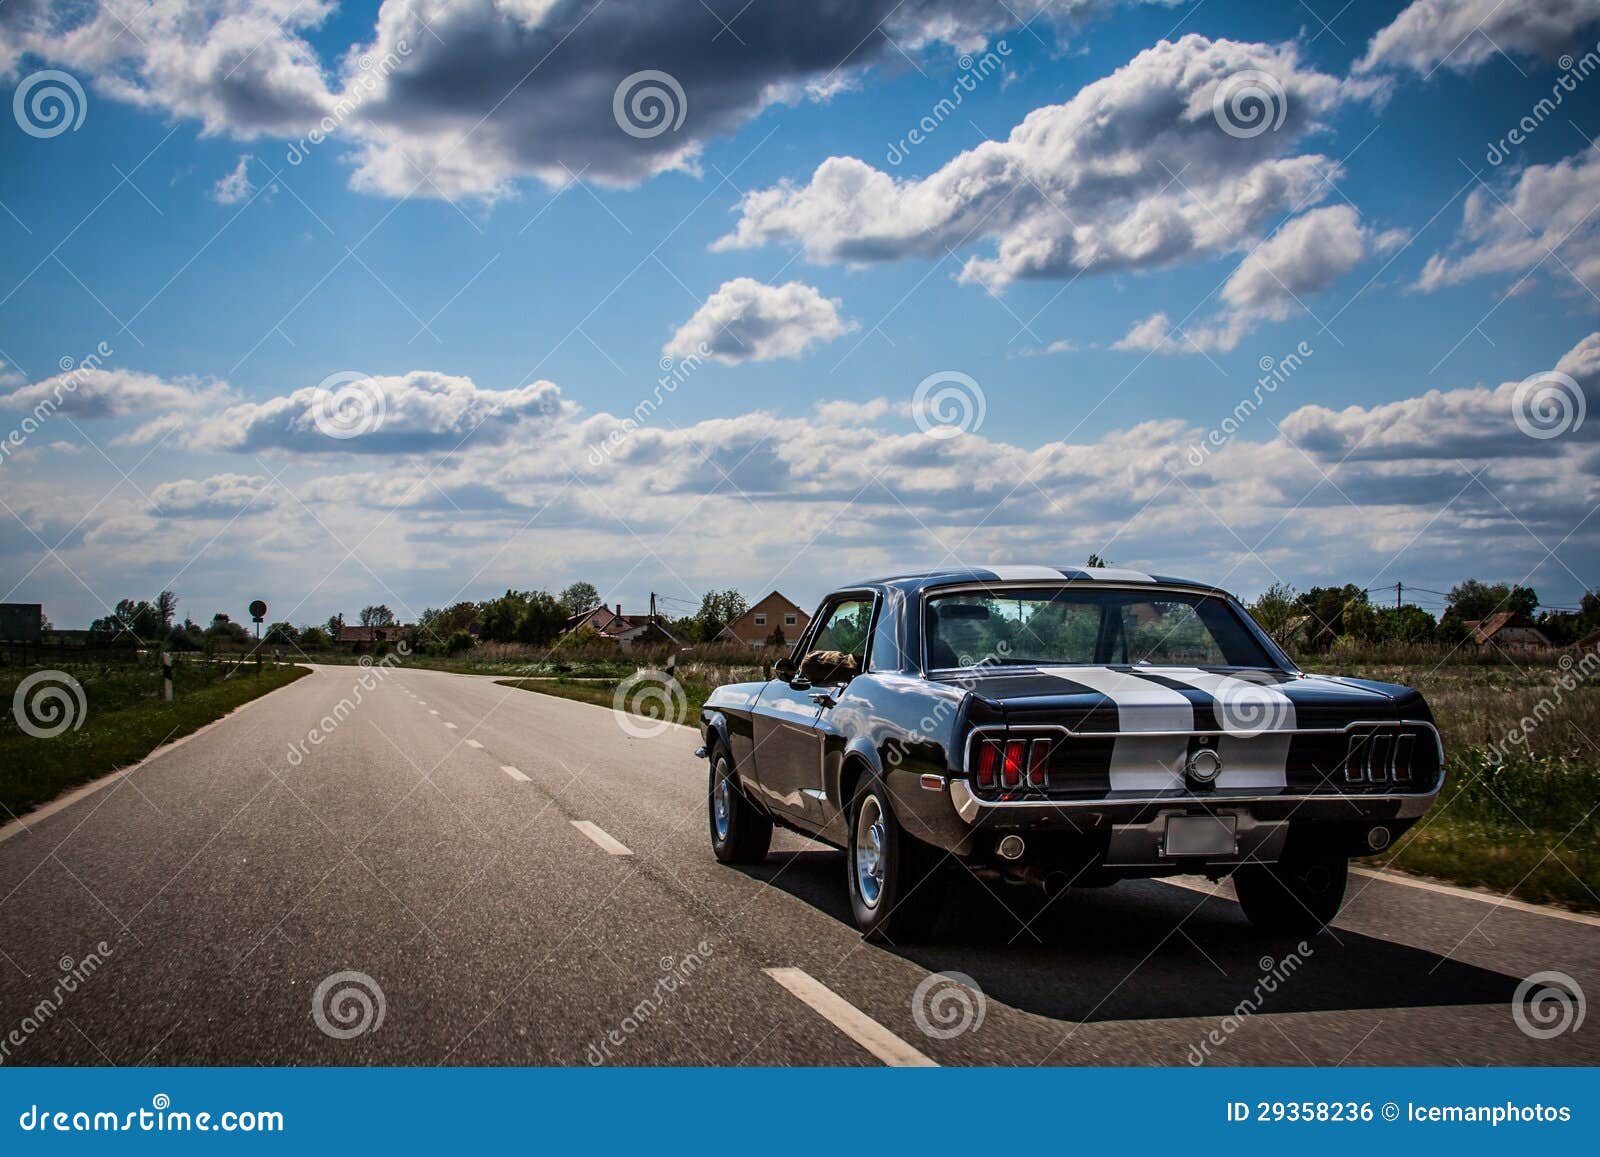 1967 ford mustang drive by